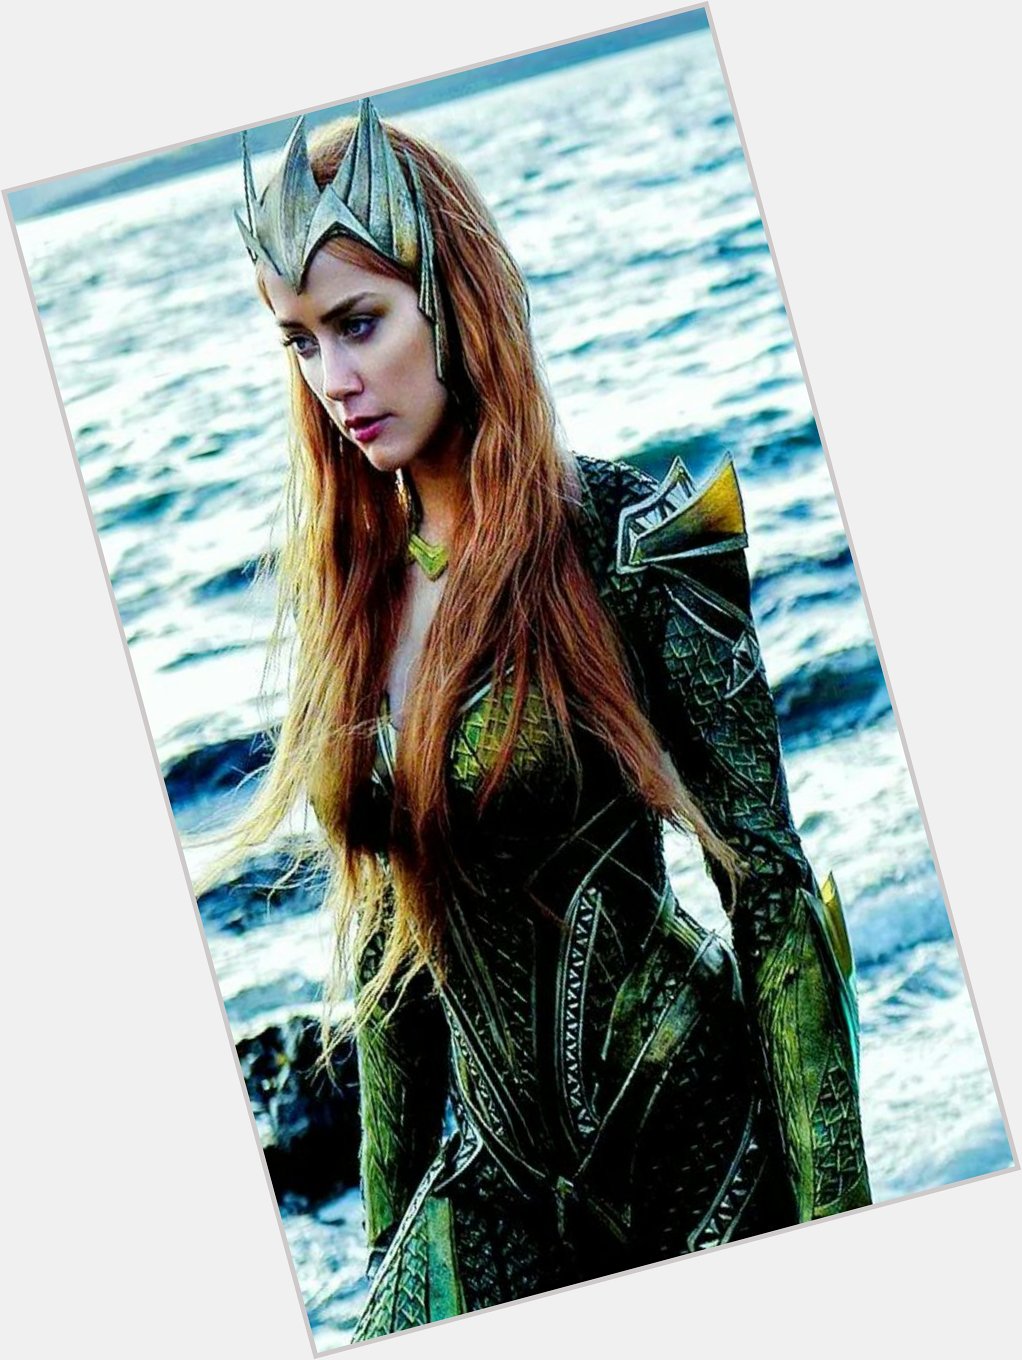 Happy Birthday Amber Heard 

Have an awesome Birthday Queen Mera   